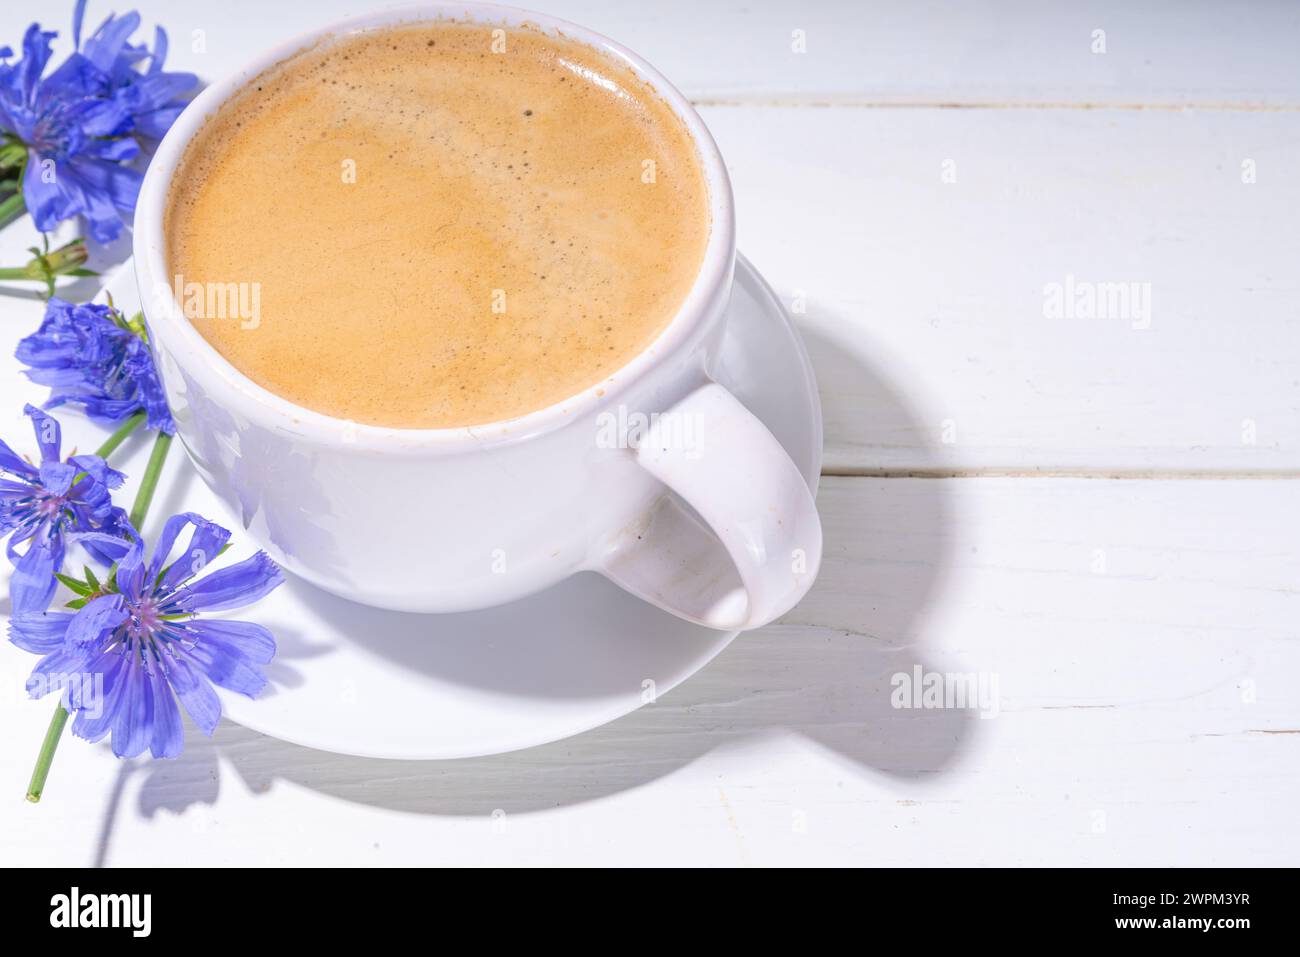 Chicory herbal coffee drink and blue flowers on white wooden table. Alternative vegan and keto diet coffee with chicory flowers and root powder Stock Photo